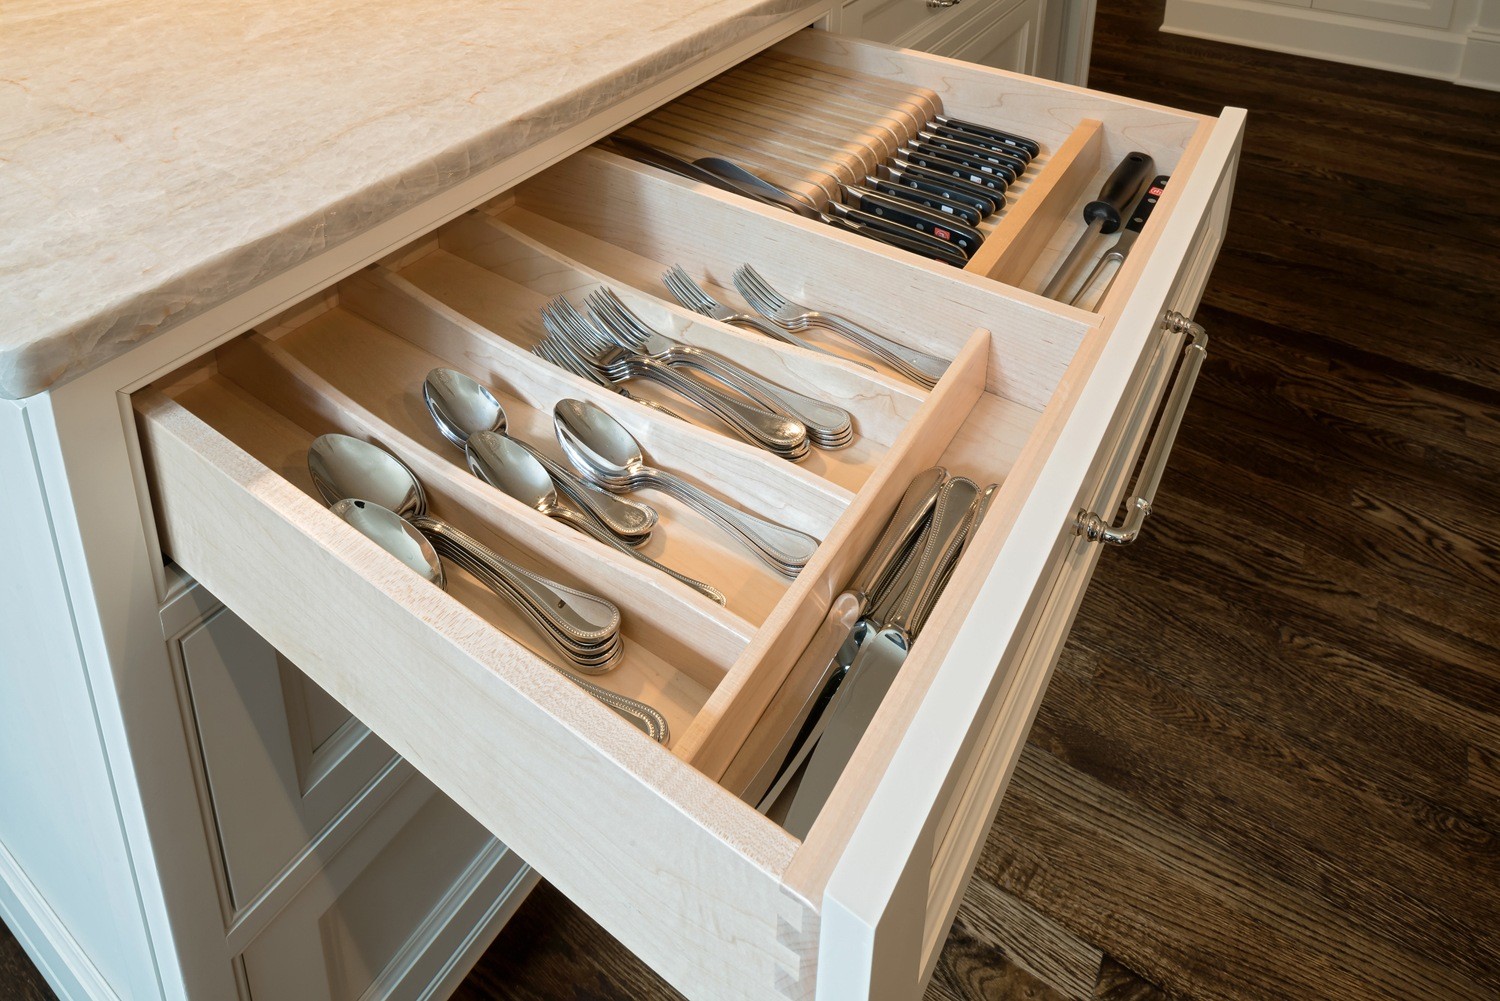 Hardwood cabinet drawers with dovetail construction and flatware storage